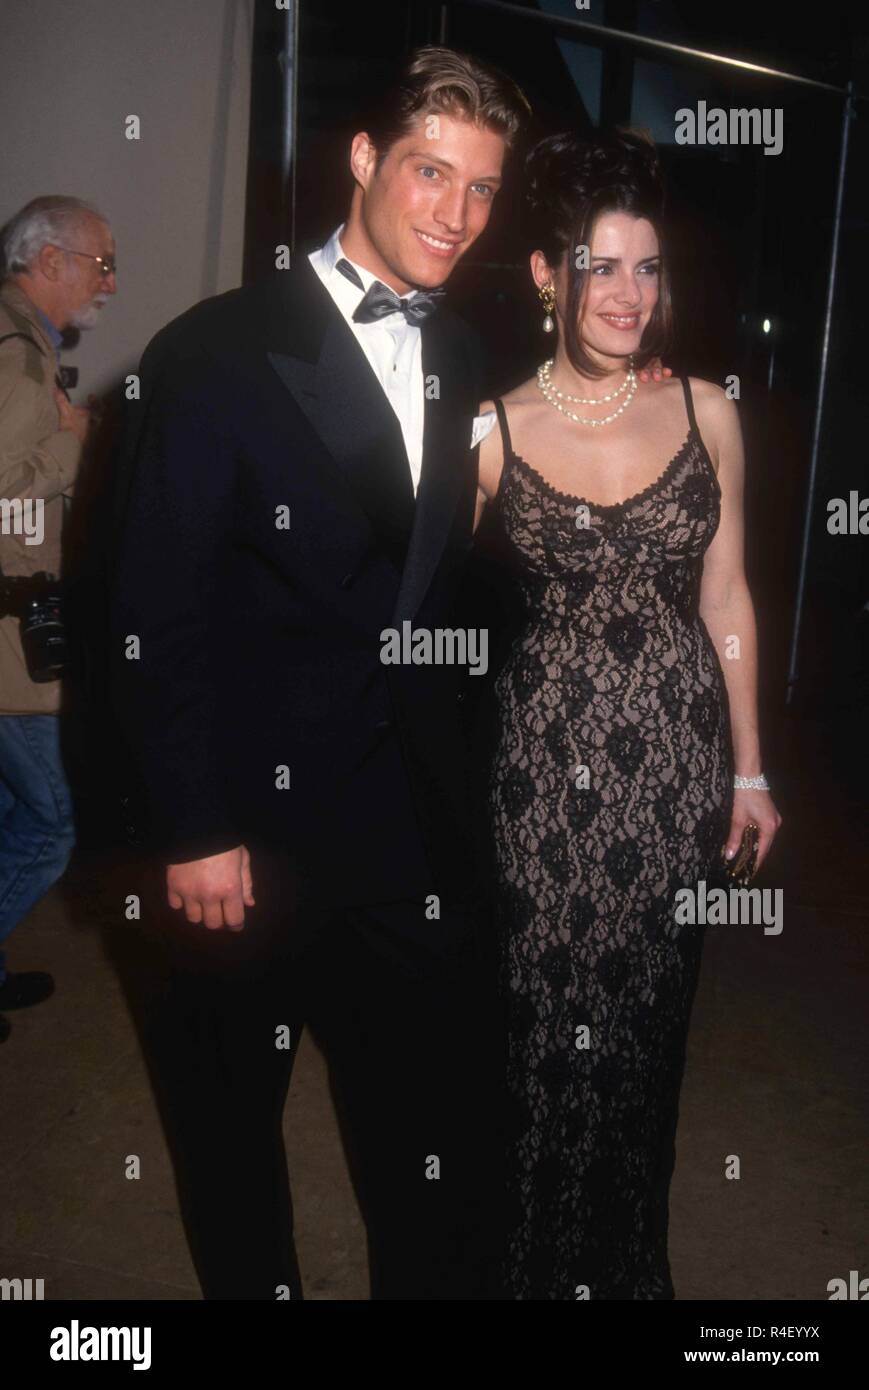 BEVERLY HILLS, CA - FEBRUARY 26: Actor Sean Kanan and Athena Ubach attend the Ninth Annual Soap Opera Digest Awards on February 26, 1993 at the Beverly Hilton Hotel in Beverly Hills, California. Photo by Barry King/Alamy Stock Photo Stock Photo